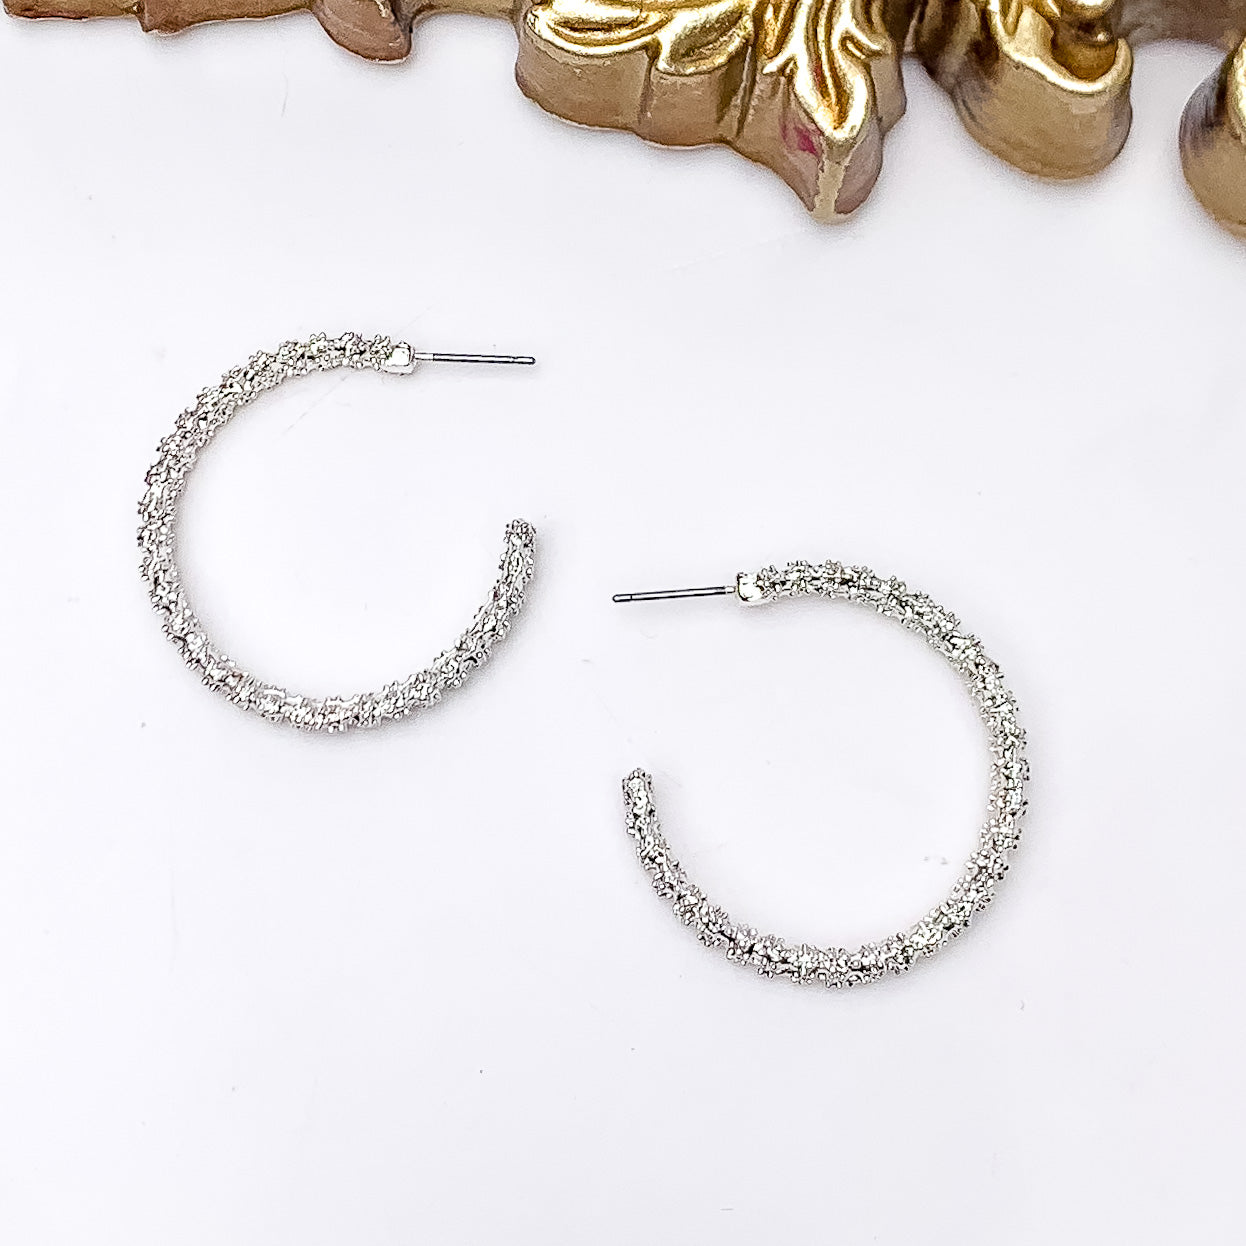 Worry Free Medium Silver Tone Textured Hoop Earrings - Giddy Up Glamour Boutique